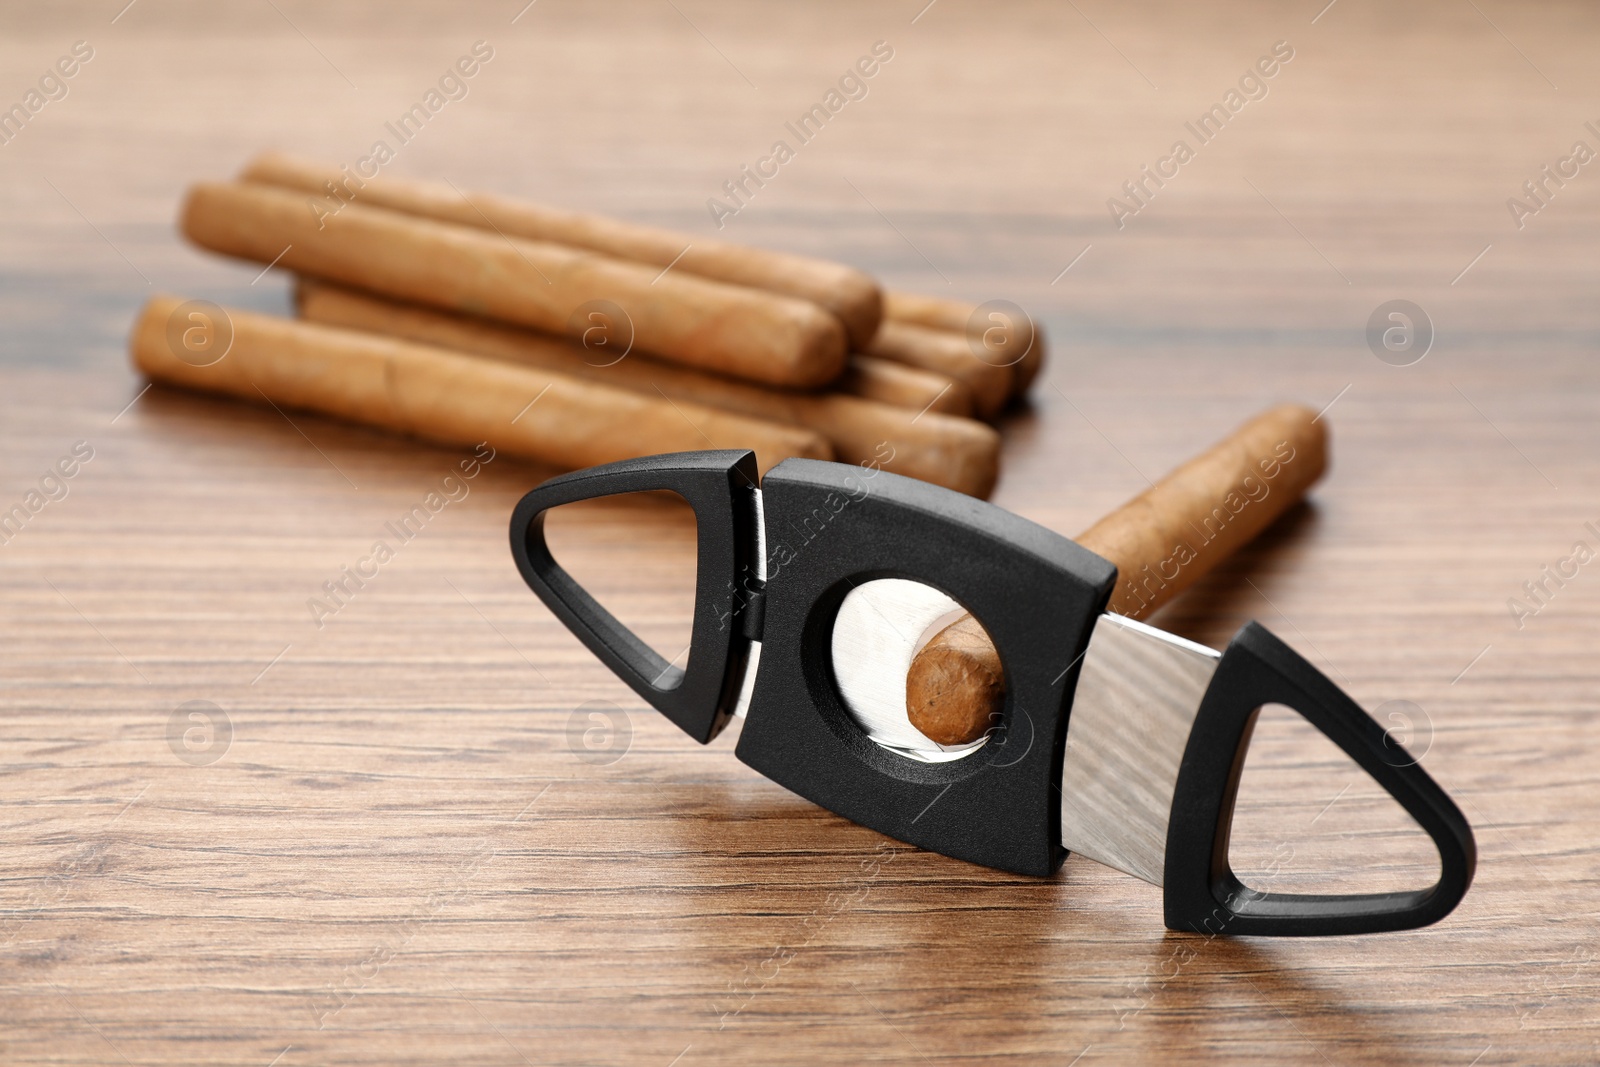 Photo of Cigars and guillotine cutter on wooden table